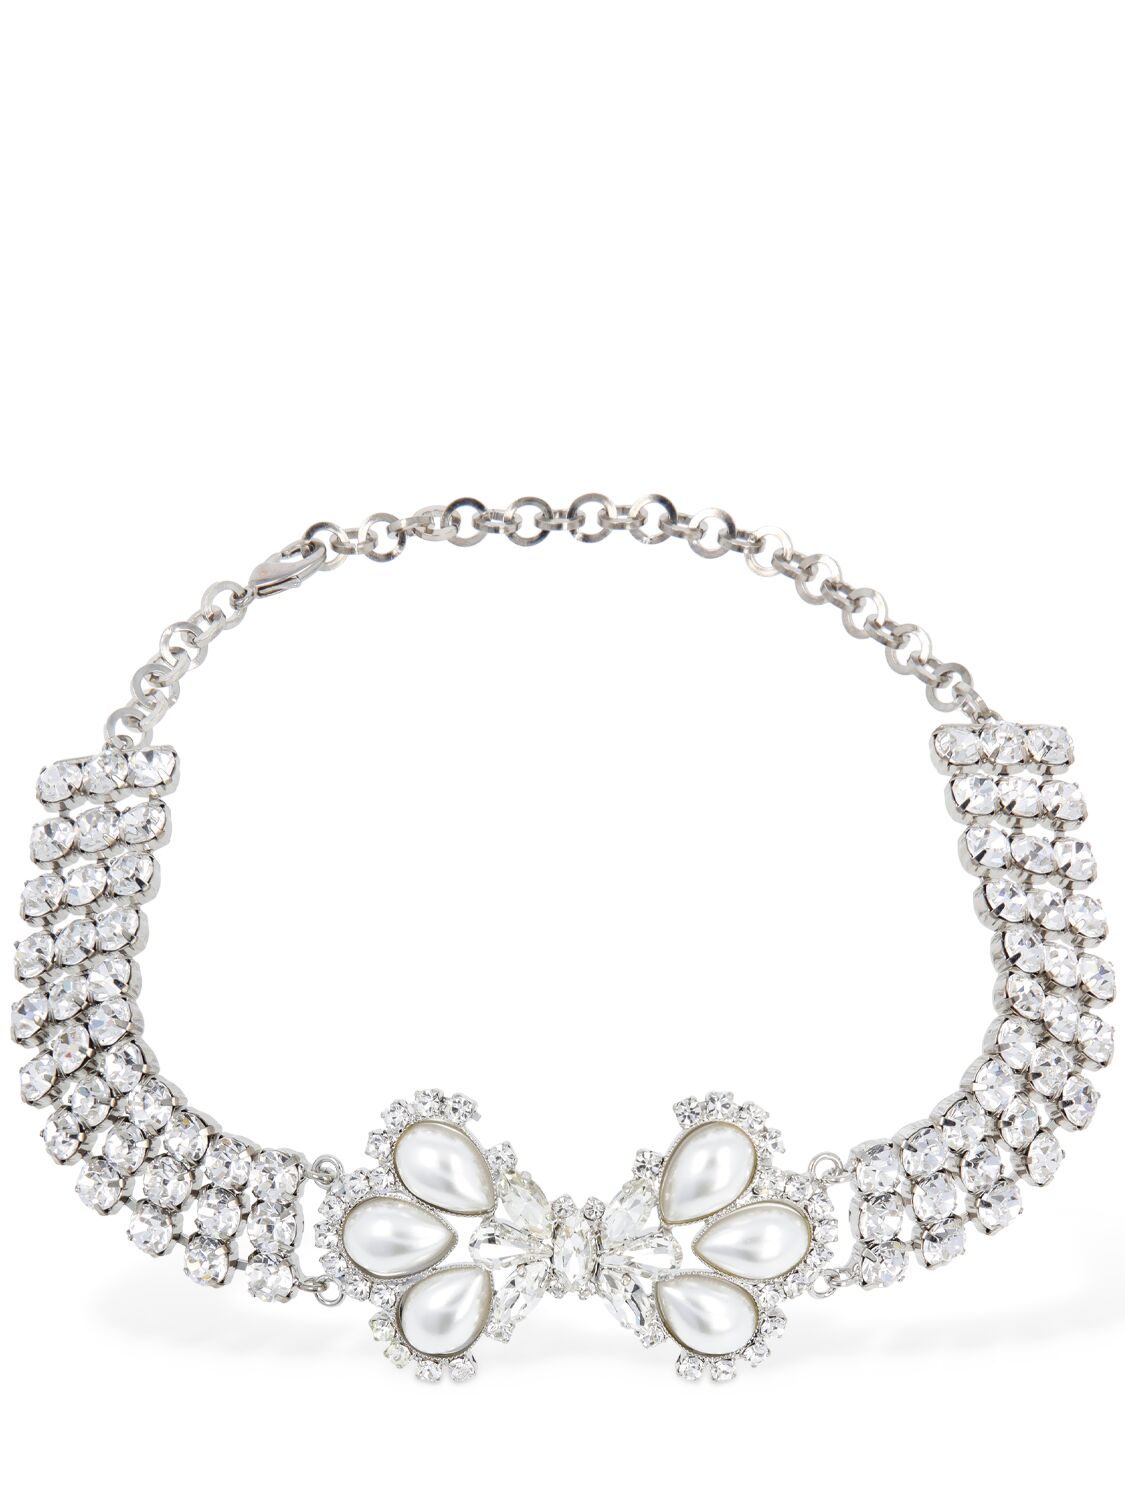 Image of Crystal & Faux Pearl Choker